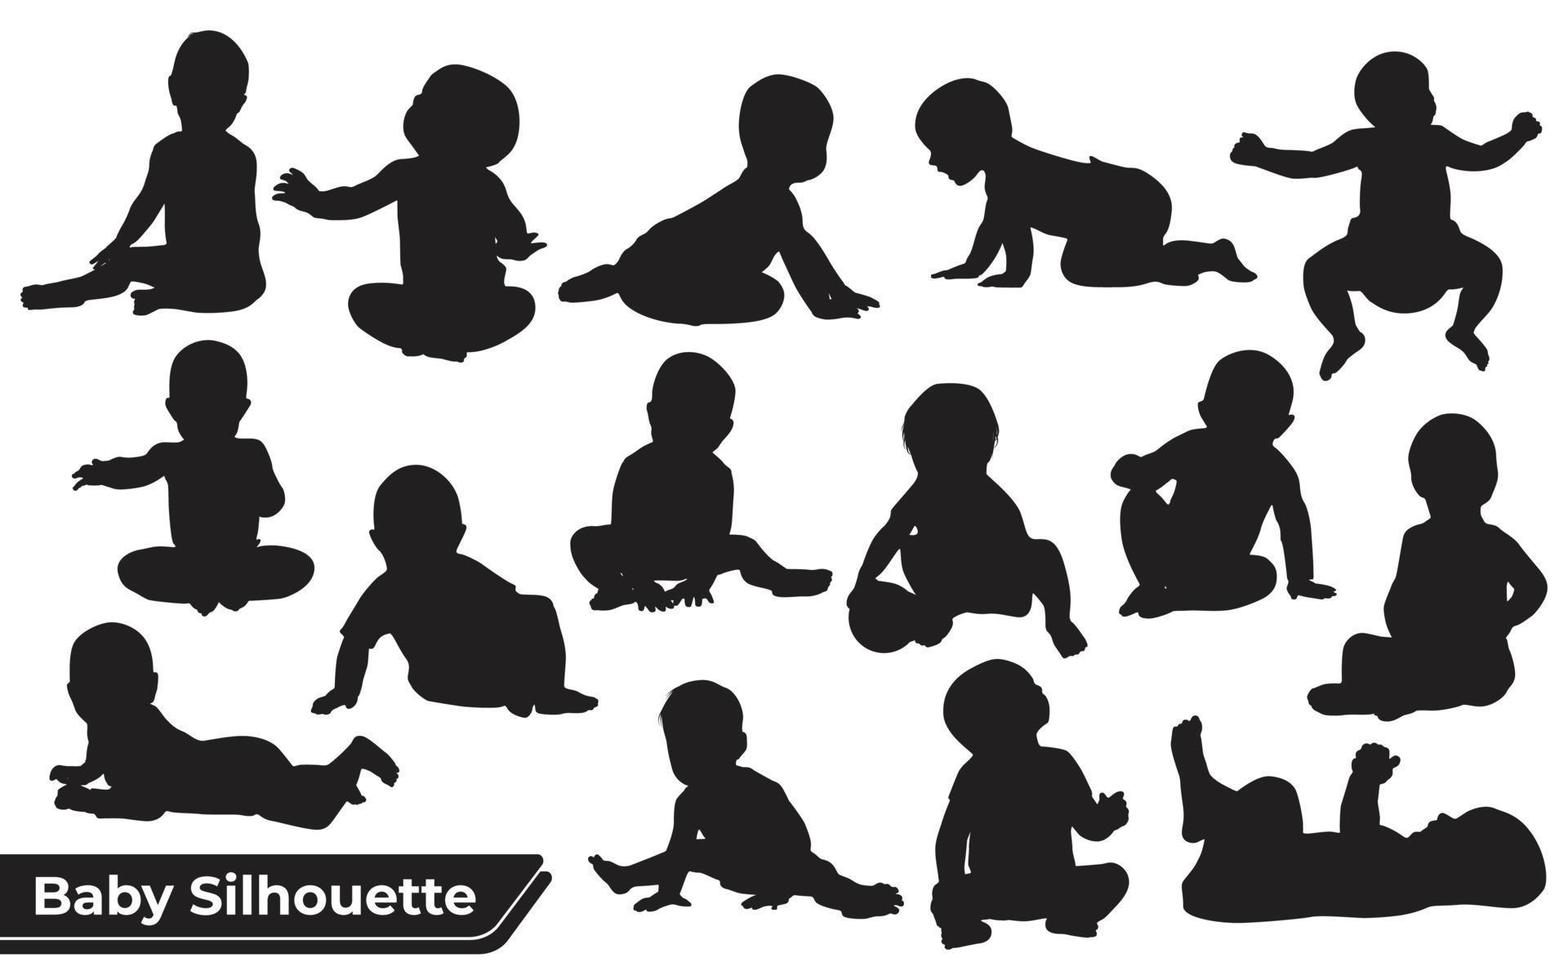 Kid and baby silhouette vector